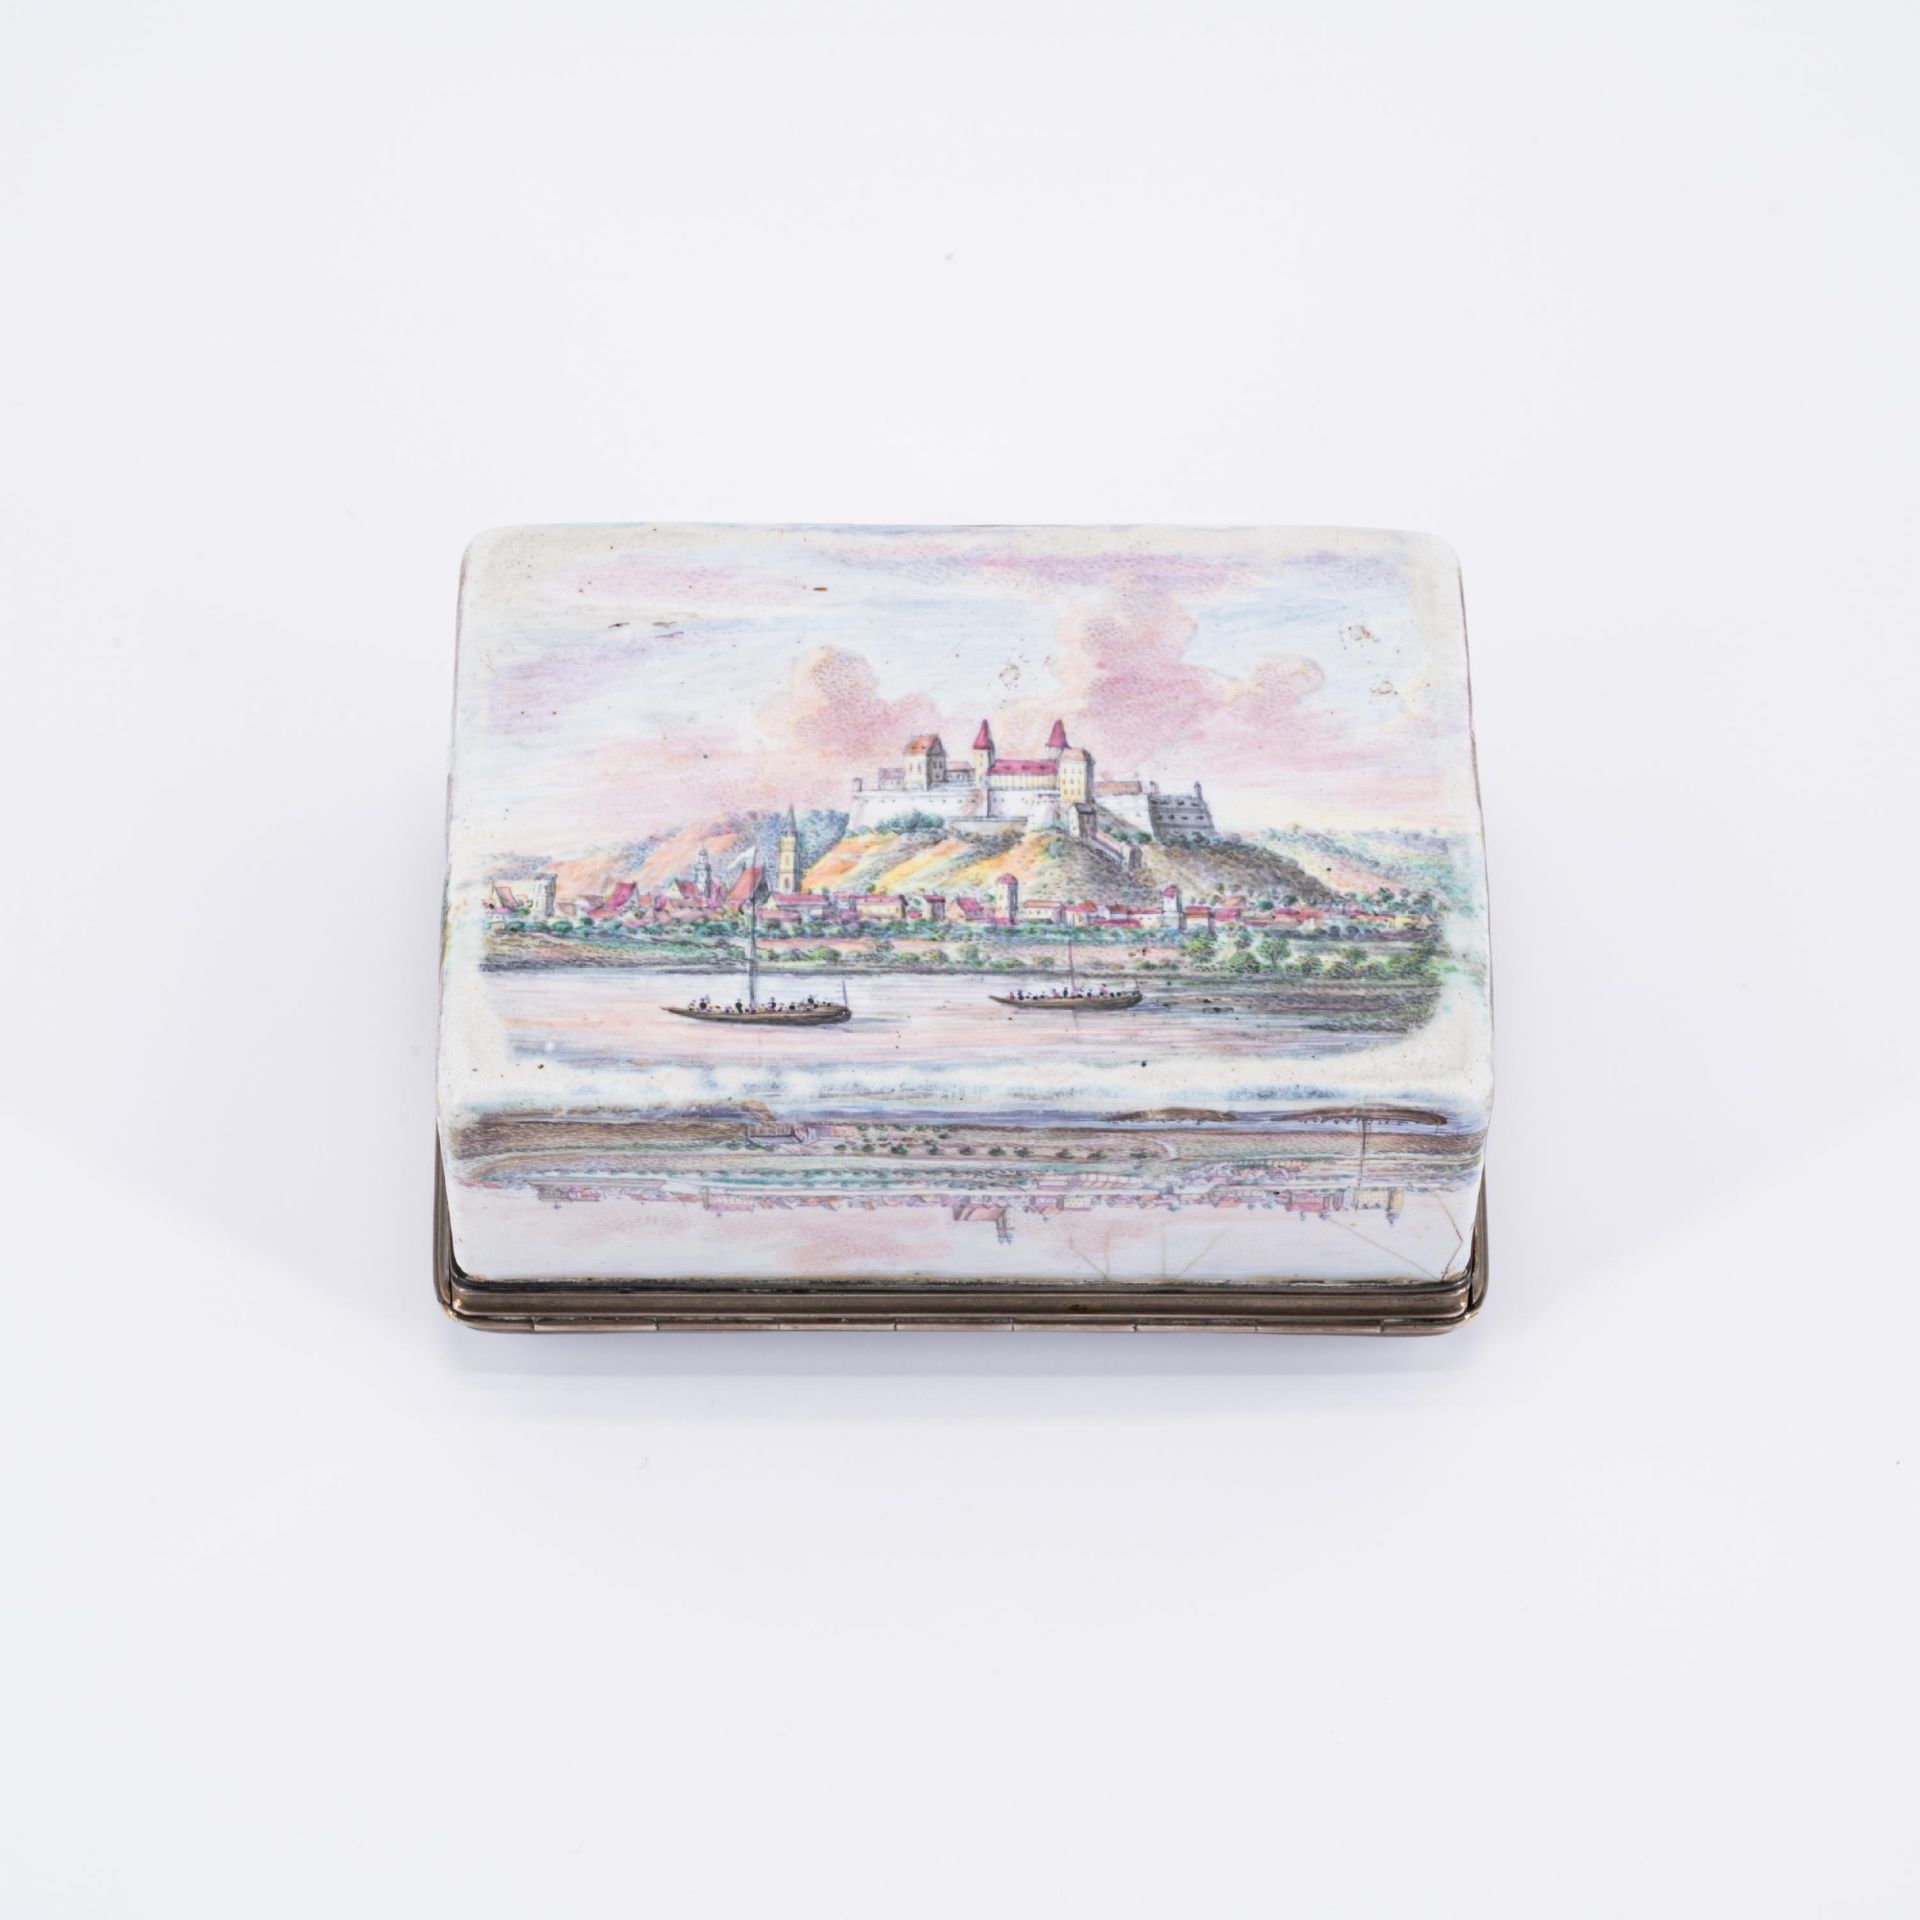 Snuff box with landscape views of Albertine Saxony - Image 6 of 7